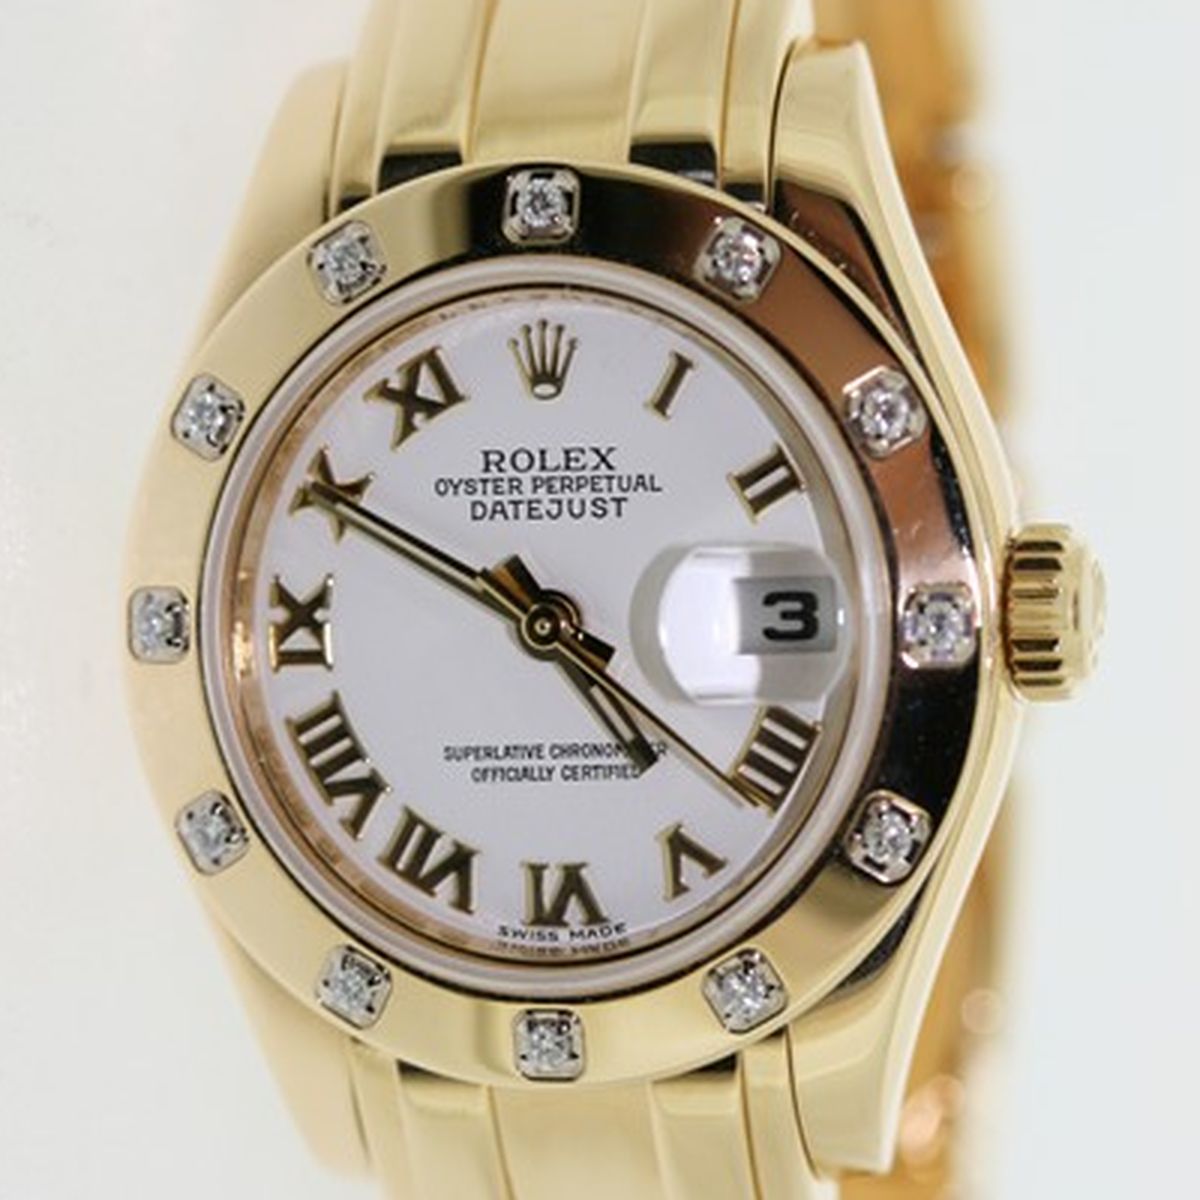 Lady-Datejust Pearlmaster Rolex Watch